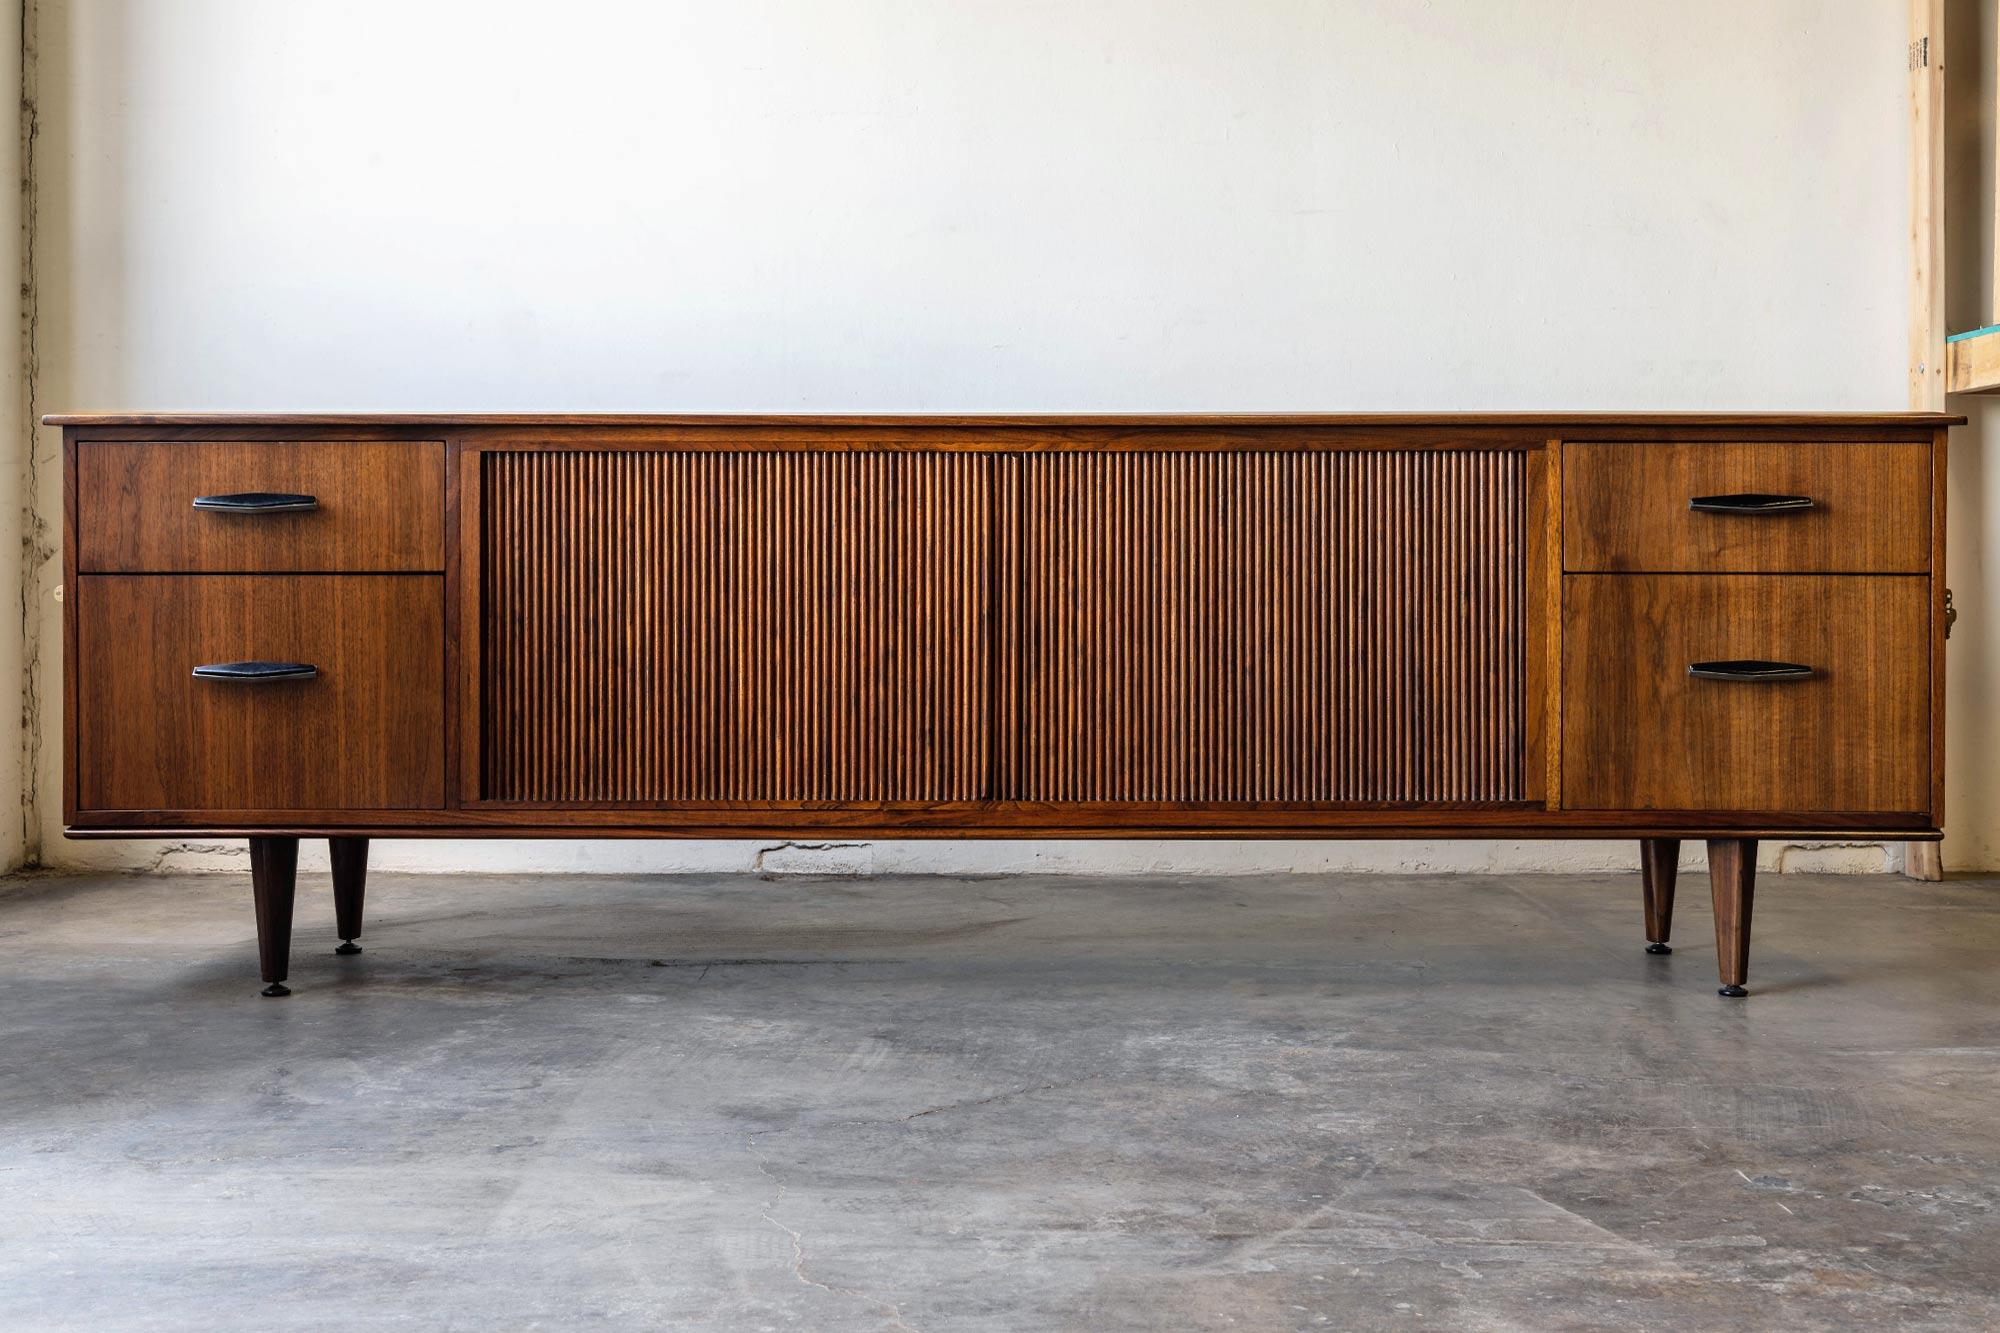 Add a touch of vintage charm to your home decor with this fully refinished tambour walnut sideboard by Maurice Bailey for Monteverdi Young. With its elegant design and rich walnut wood grain, this piece is a true showstopper. The convenient tambour